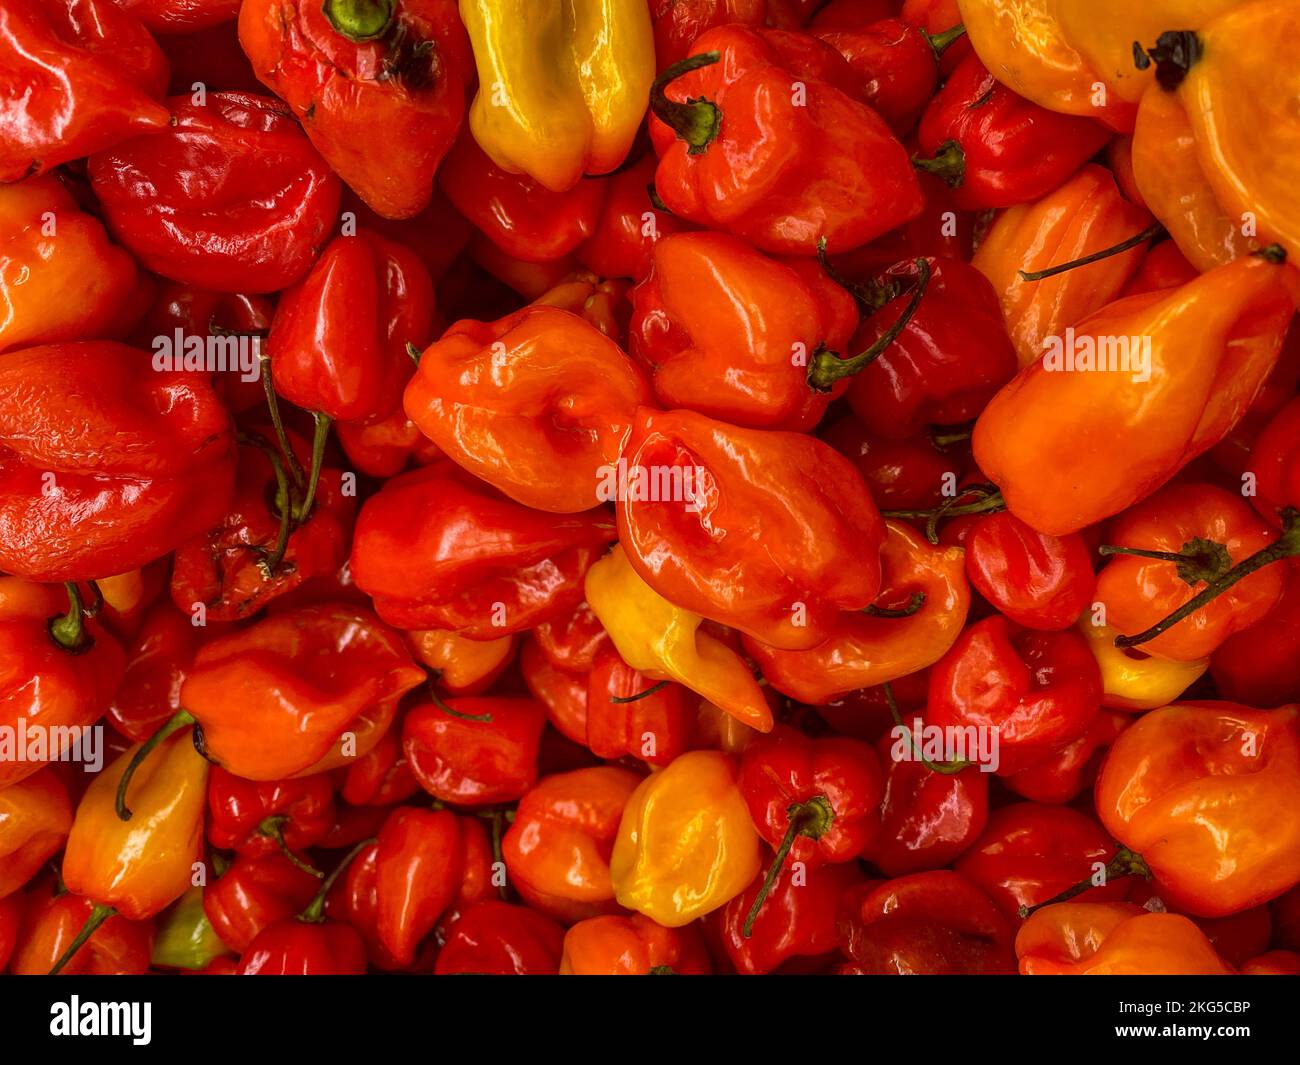 Orange Habanero Peppers, Spicy Harvest Pepper, Background, supermarket produce, Central American habanero, African spice Stock Photo